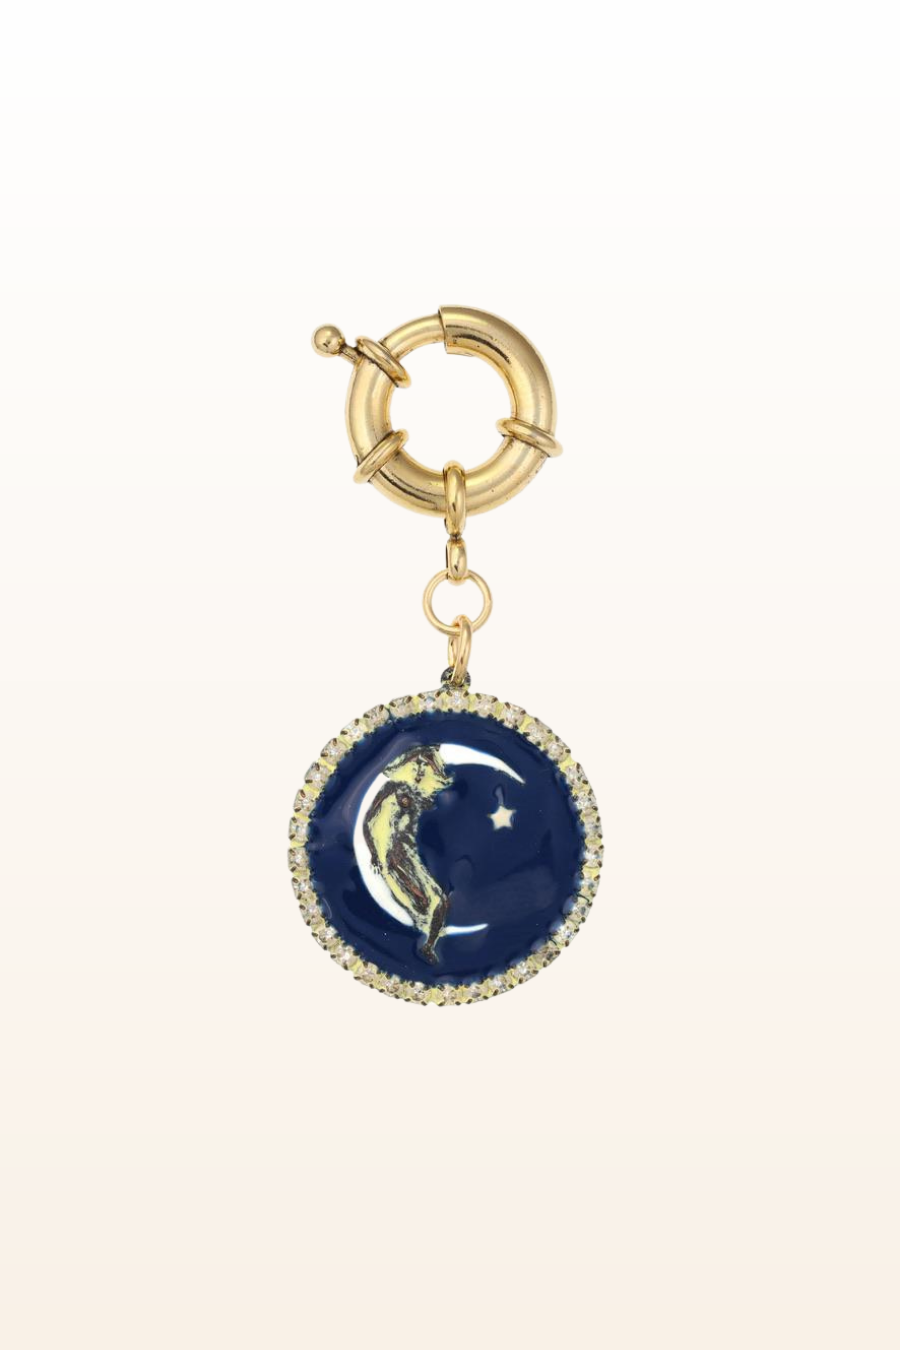 Woman on the Moon Clip on Charm